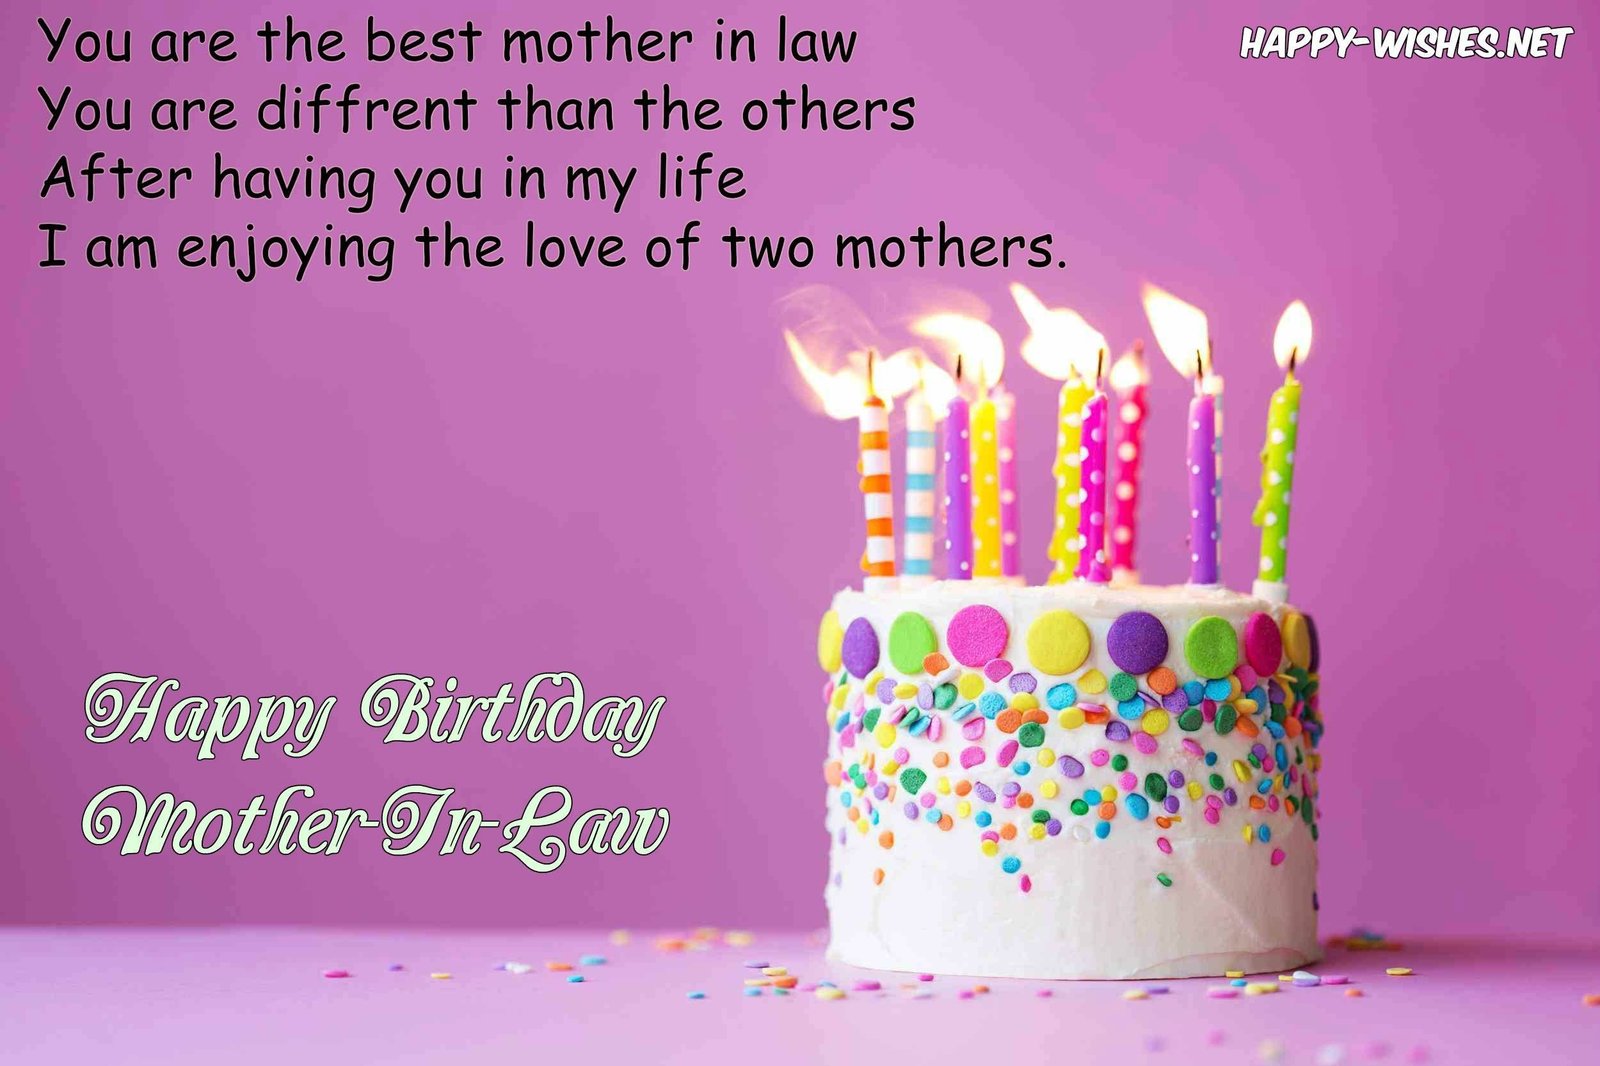 You Are The Best Mother In Law Birthday Wishes